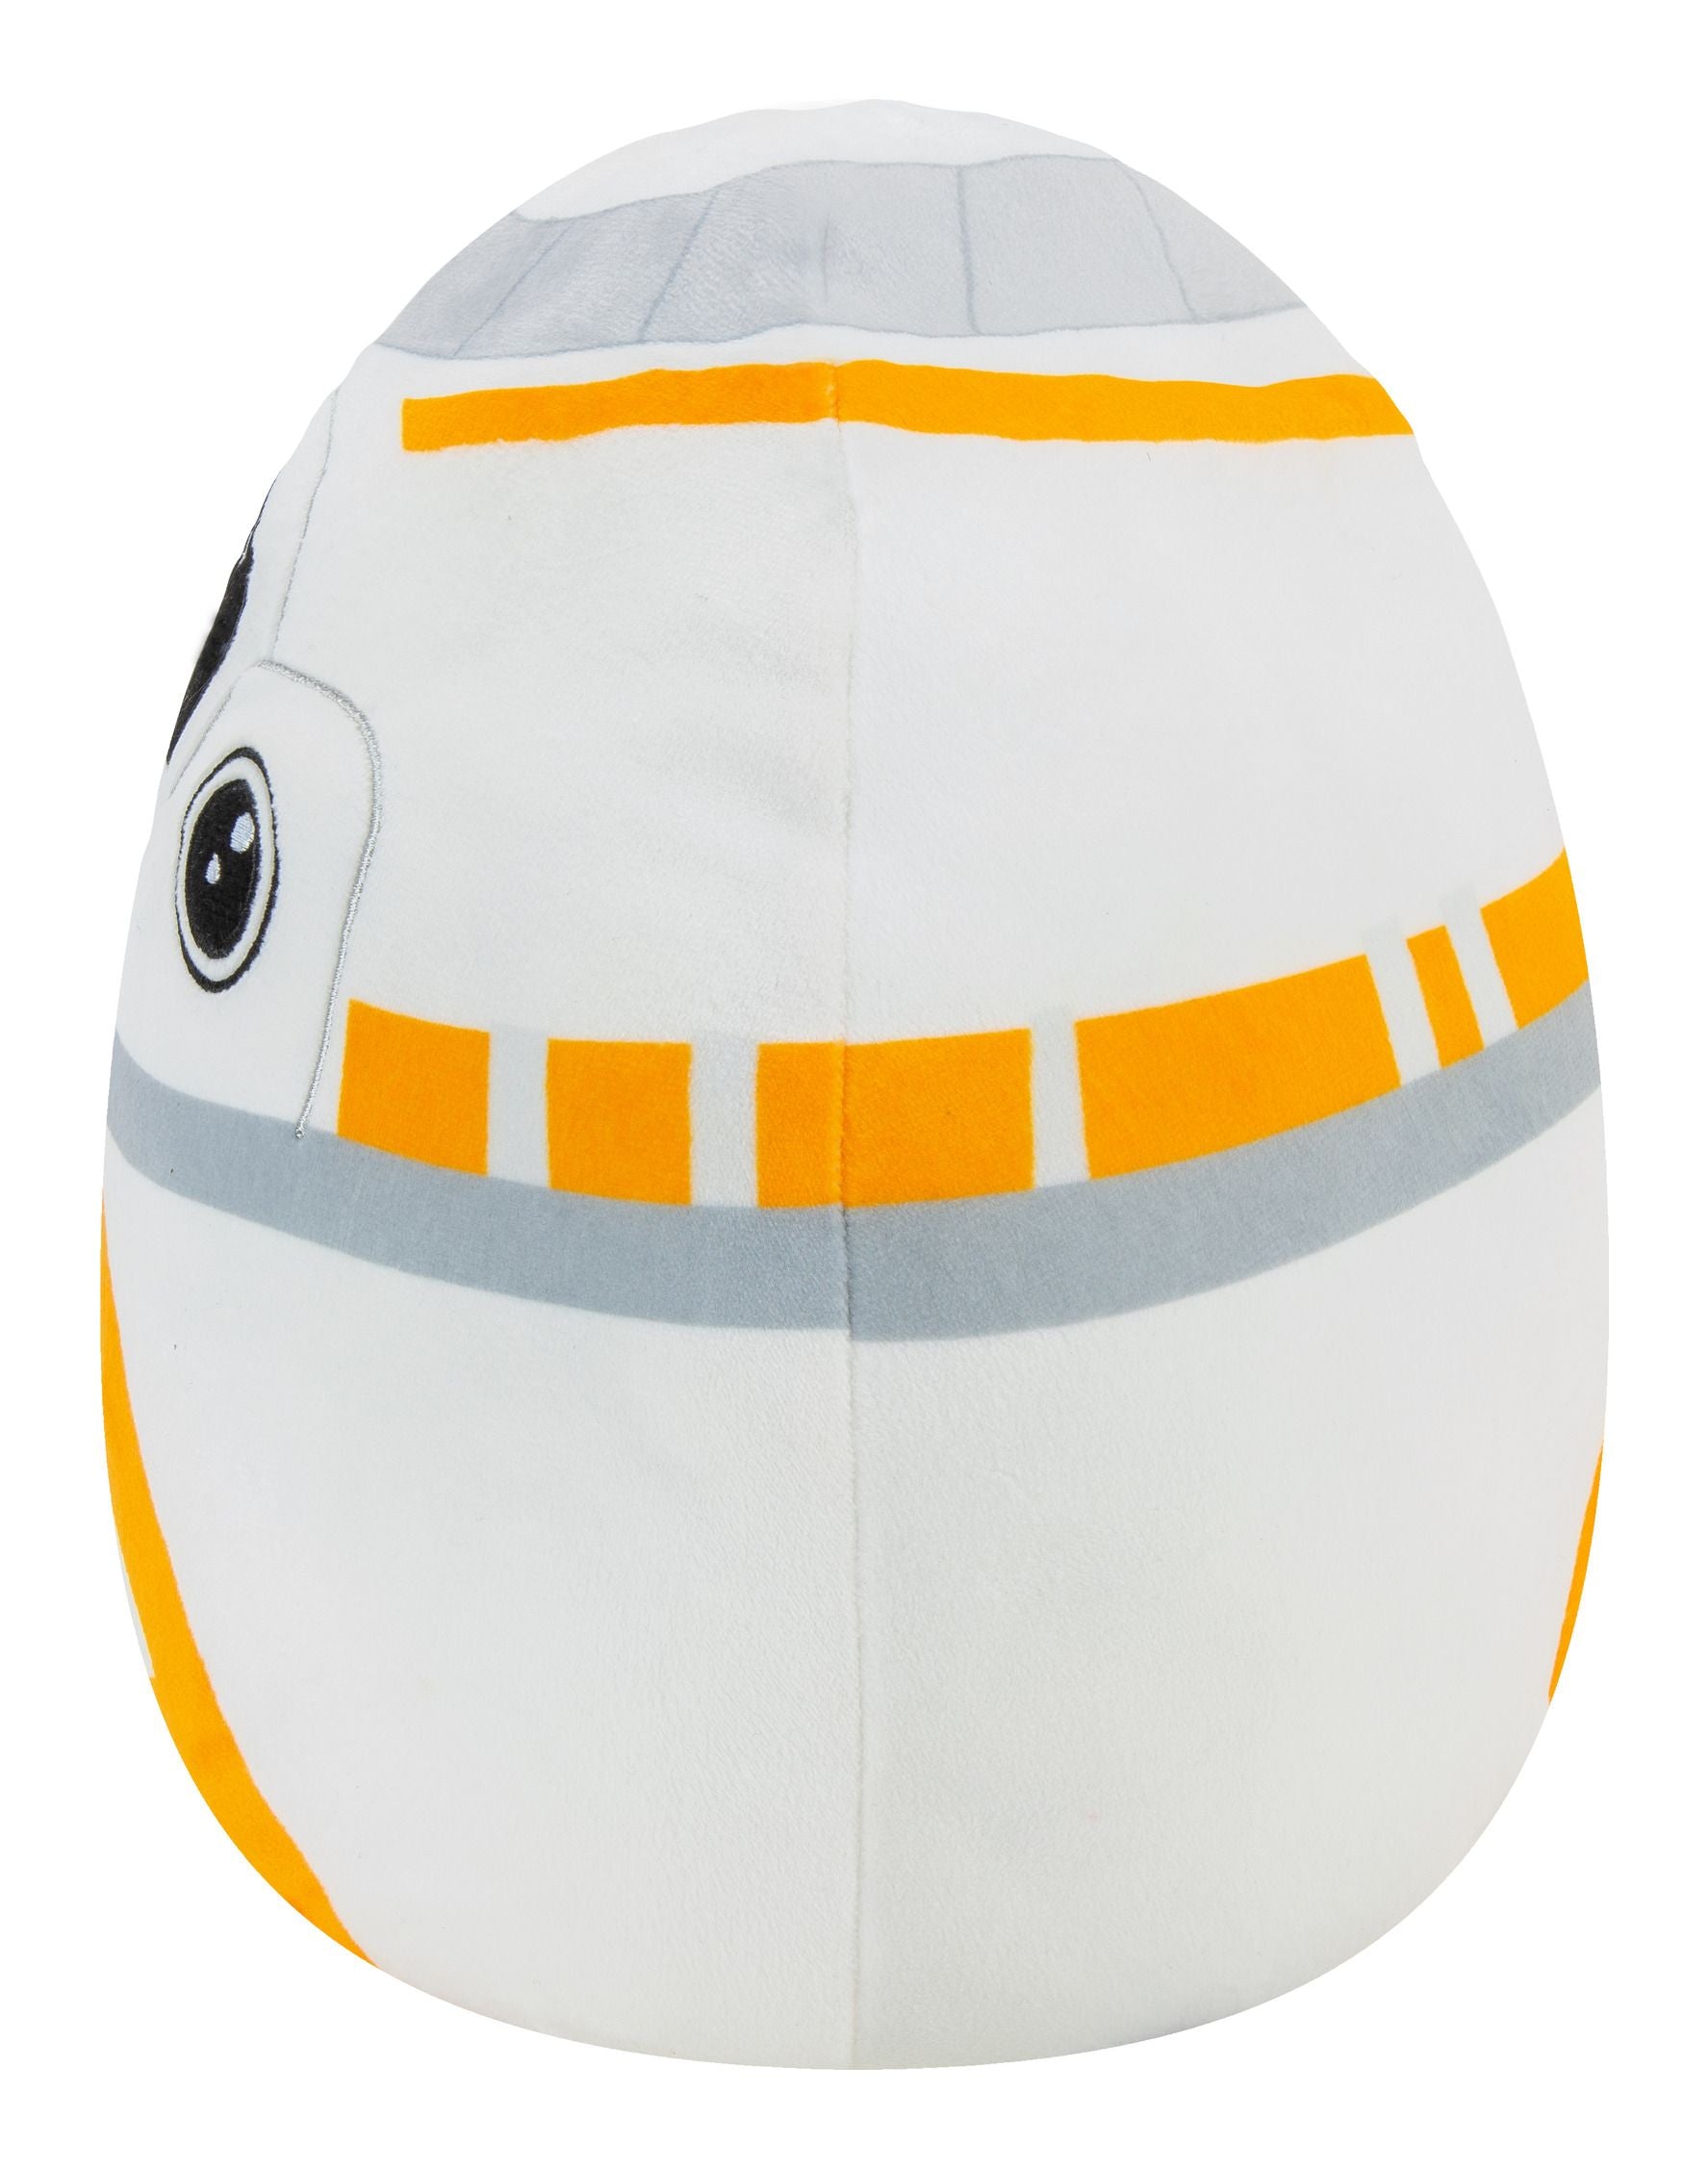 The Squishmallows Star Wars BB-8 is an officially licensed product with adorable orange details, perfect for cuddling!